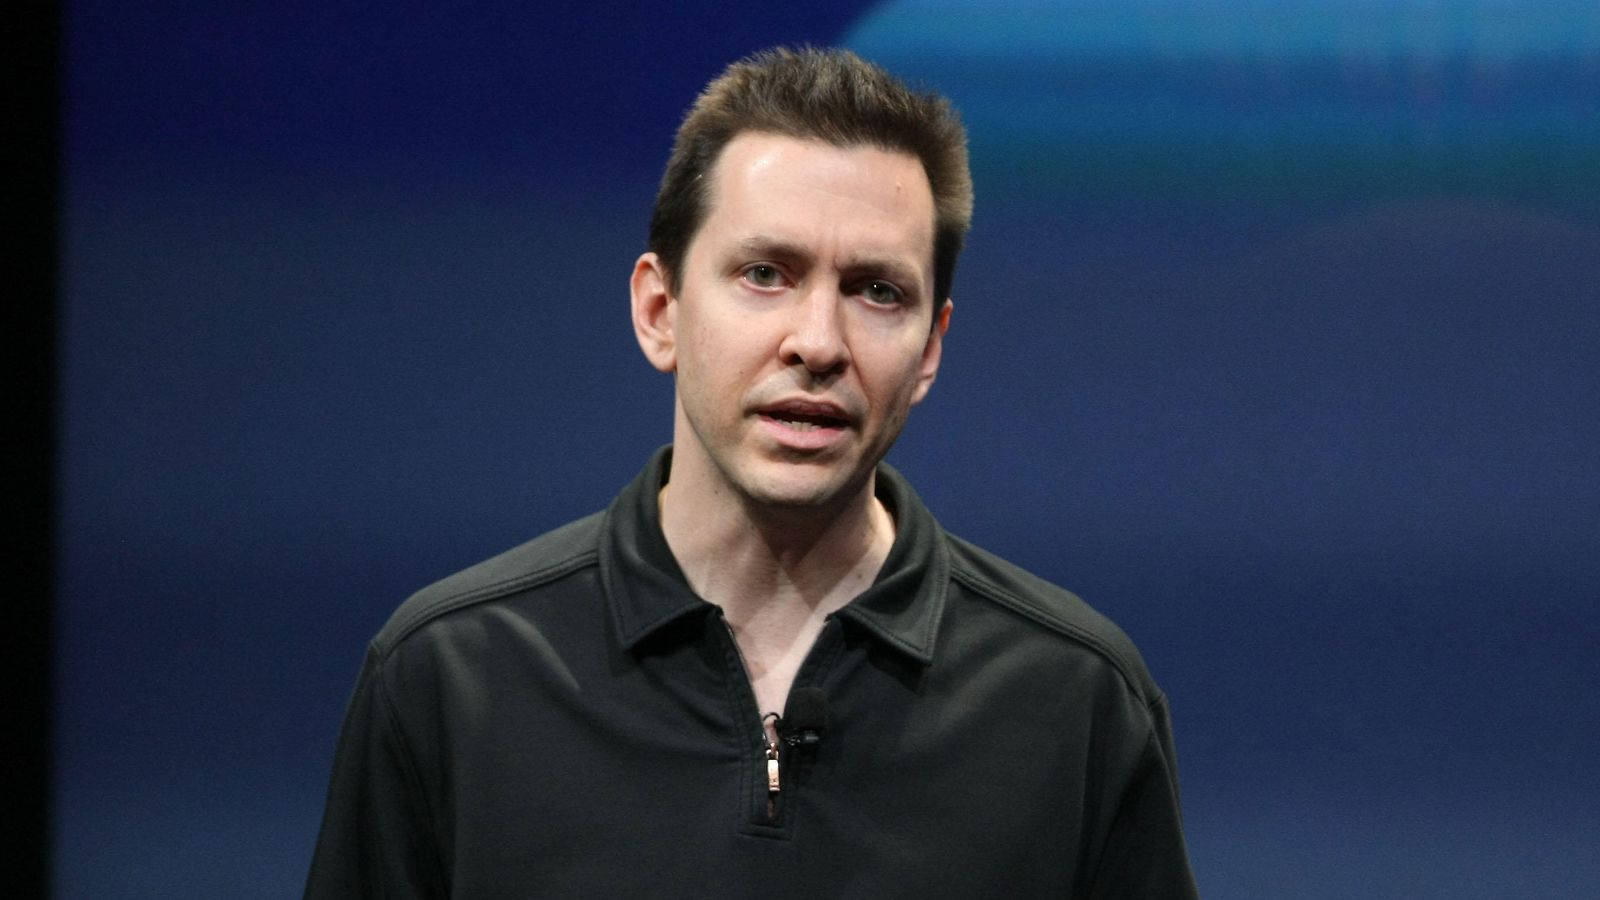 Scott Forstall And His Vision In A Presentation Picture